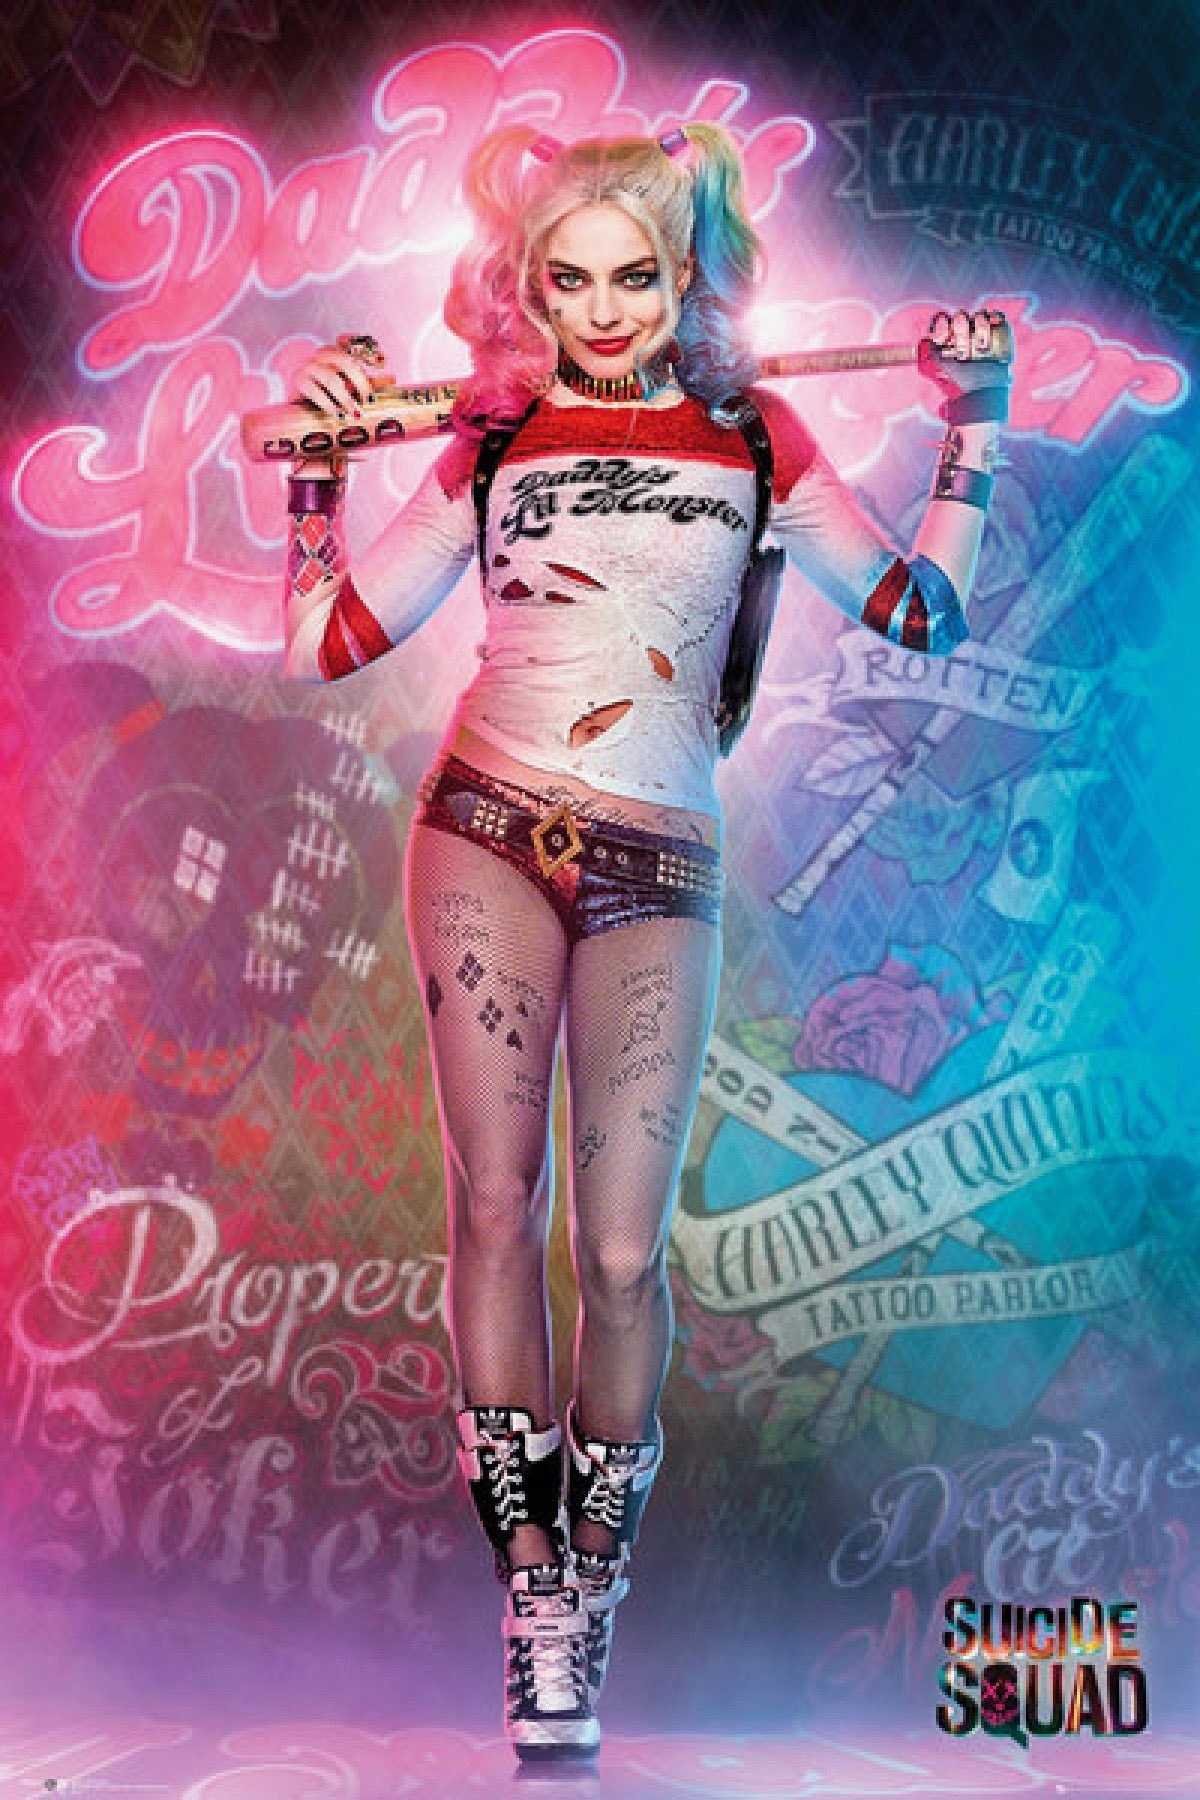 Harley Quinn Suicide Squad Wallpaper 1